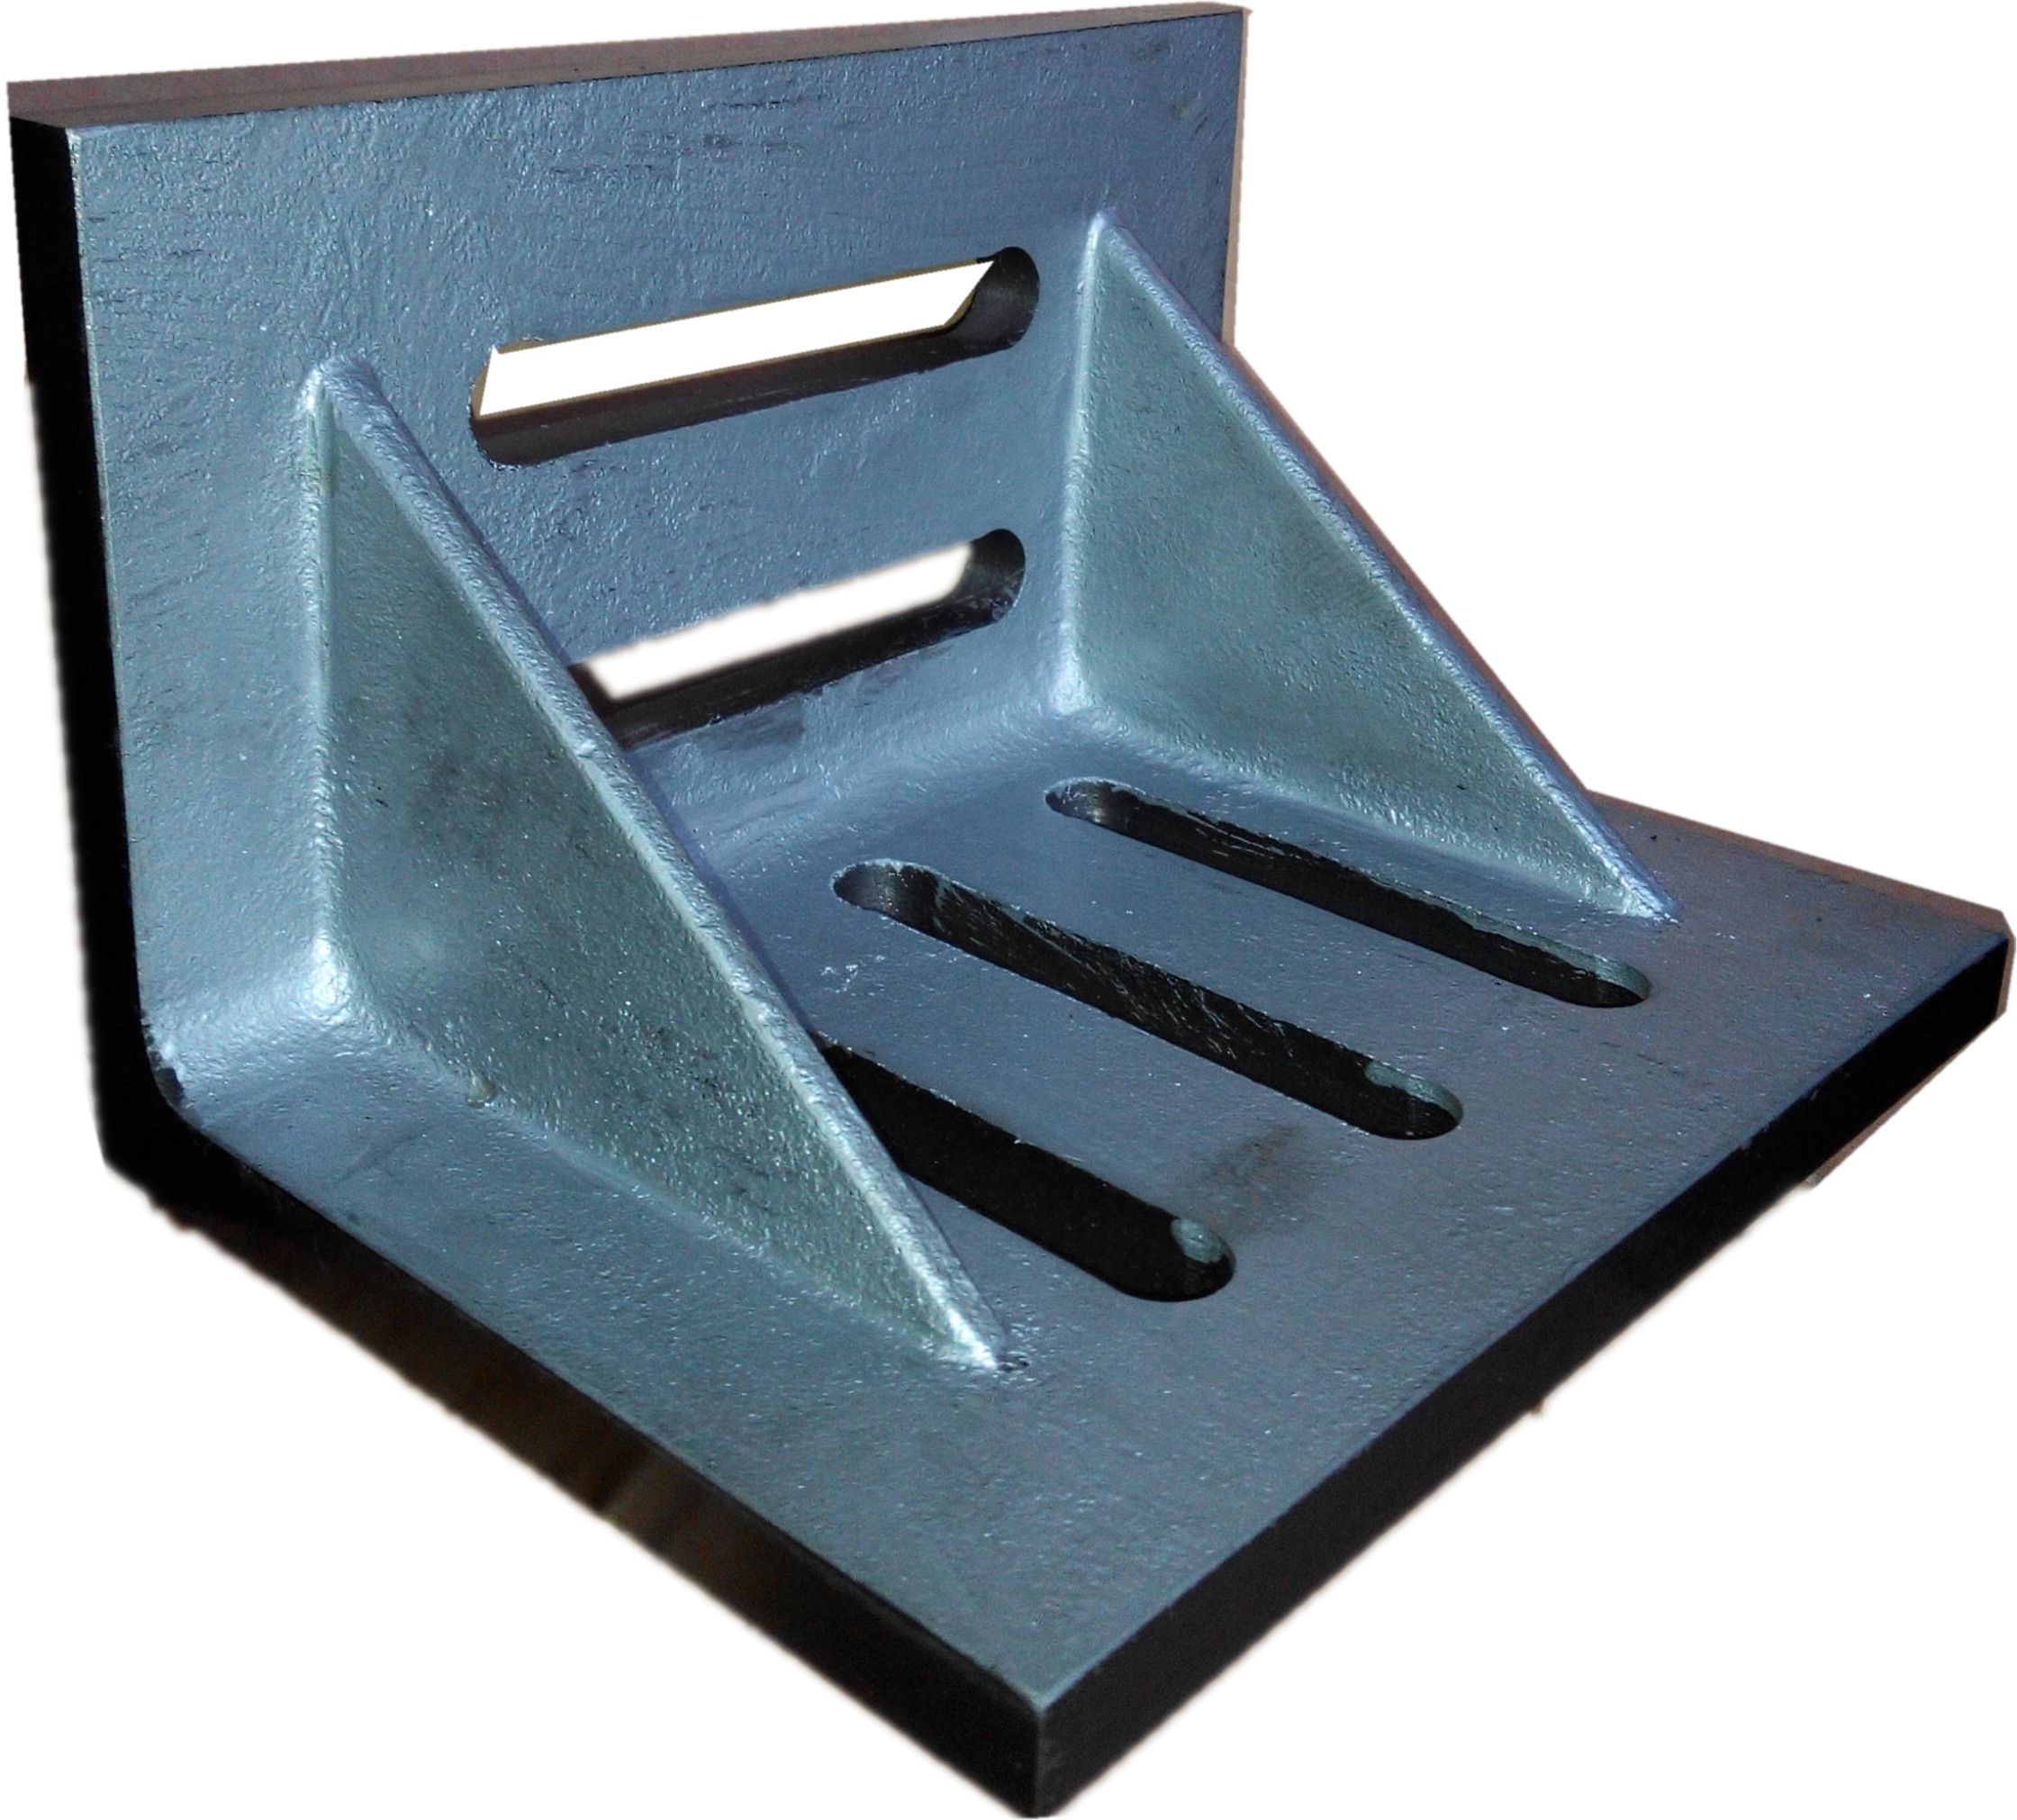 7 X 5-1/2 X 4-1/2" WEBBED SLOTTED ANGLE PLATE (3402-0305)